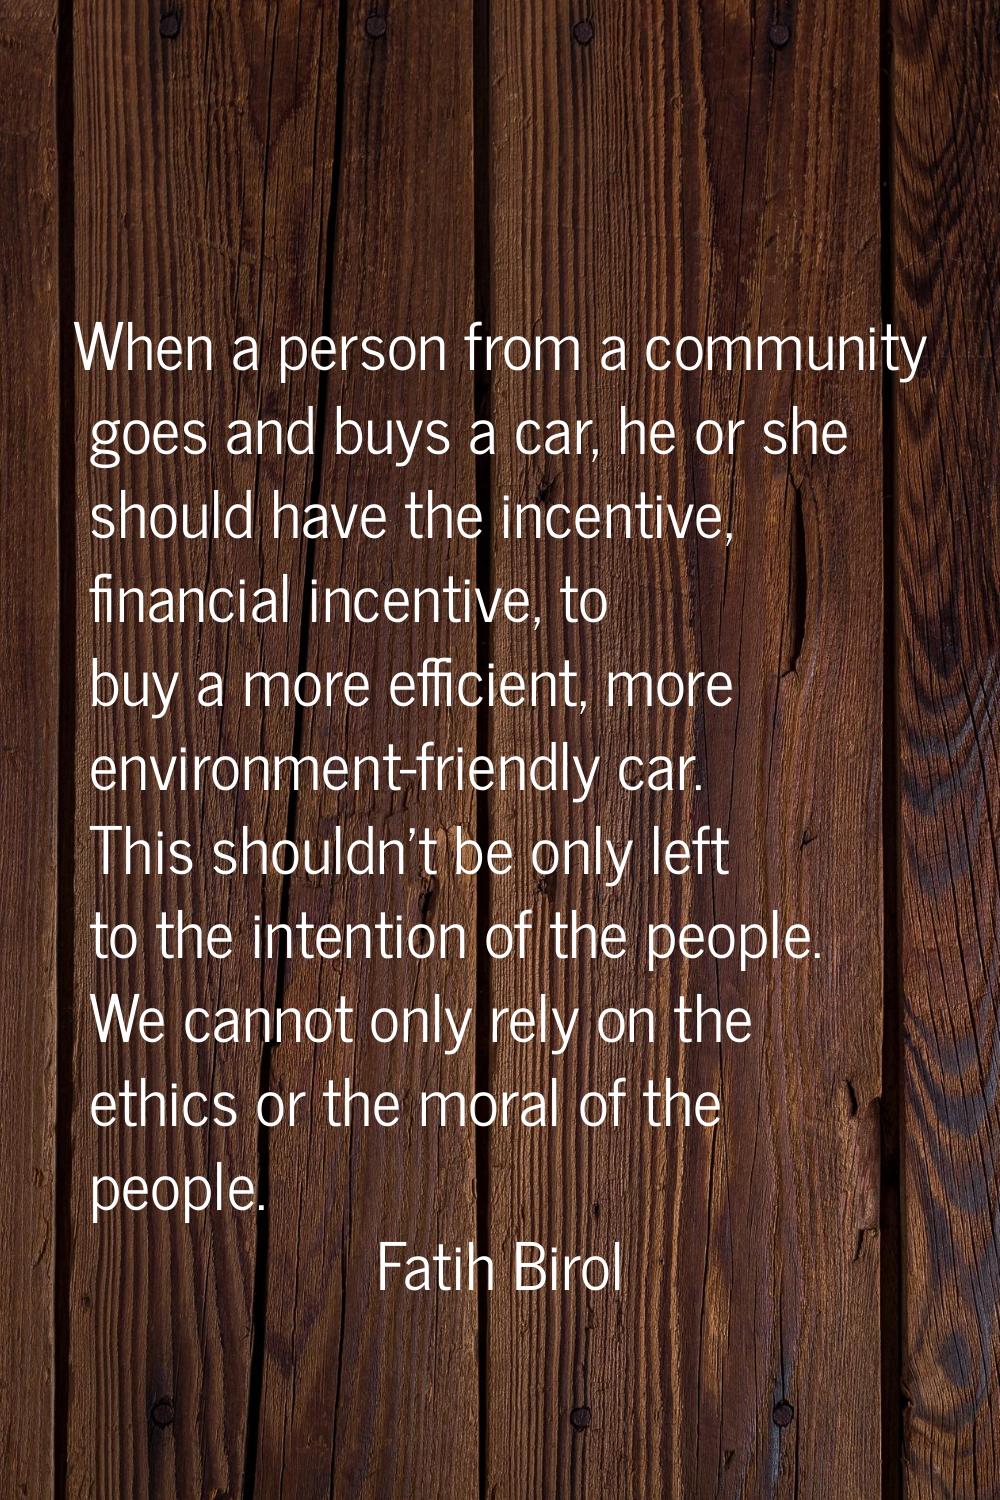 When a person from a community goes and buys a car, he or she should have the incentive, financial 